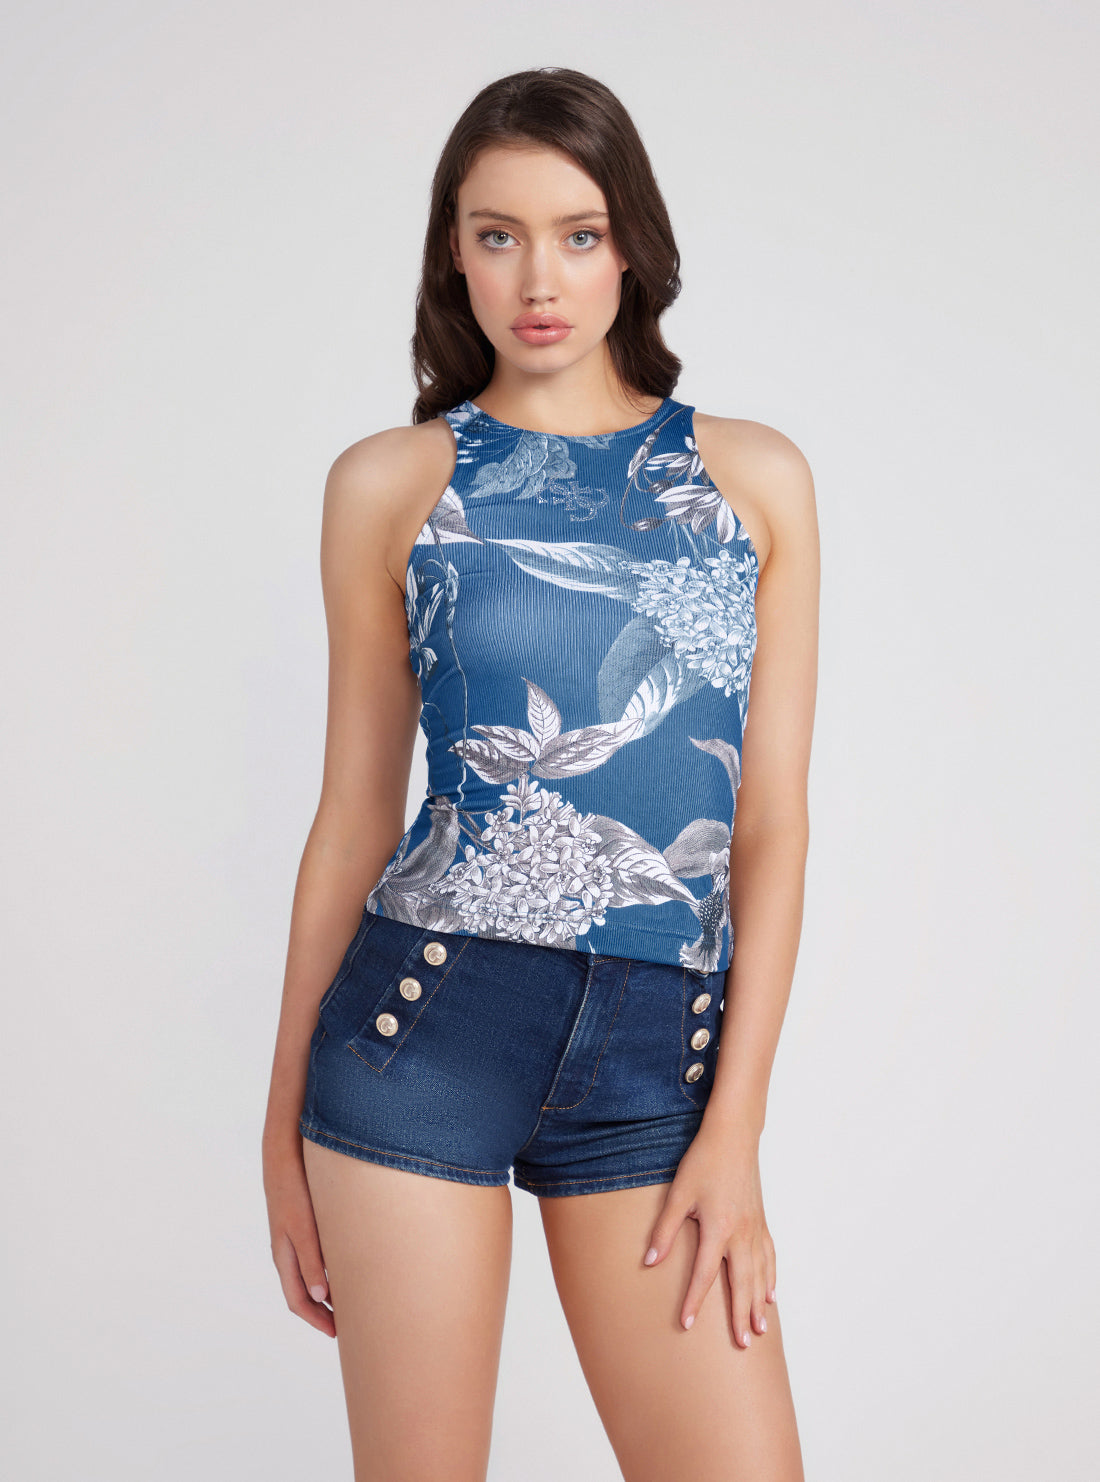 GUESS Blue Floral Sleeveless Guendalina Singlet Top front view